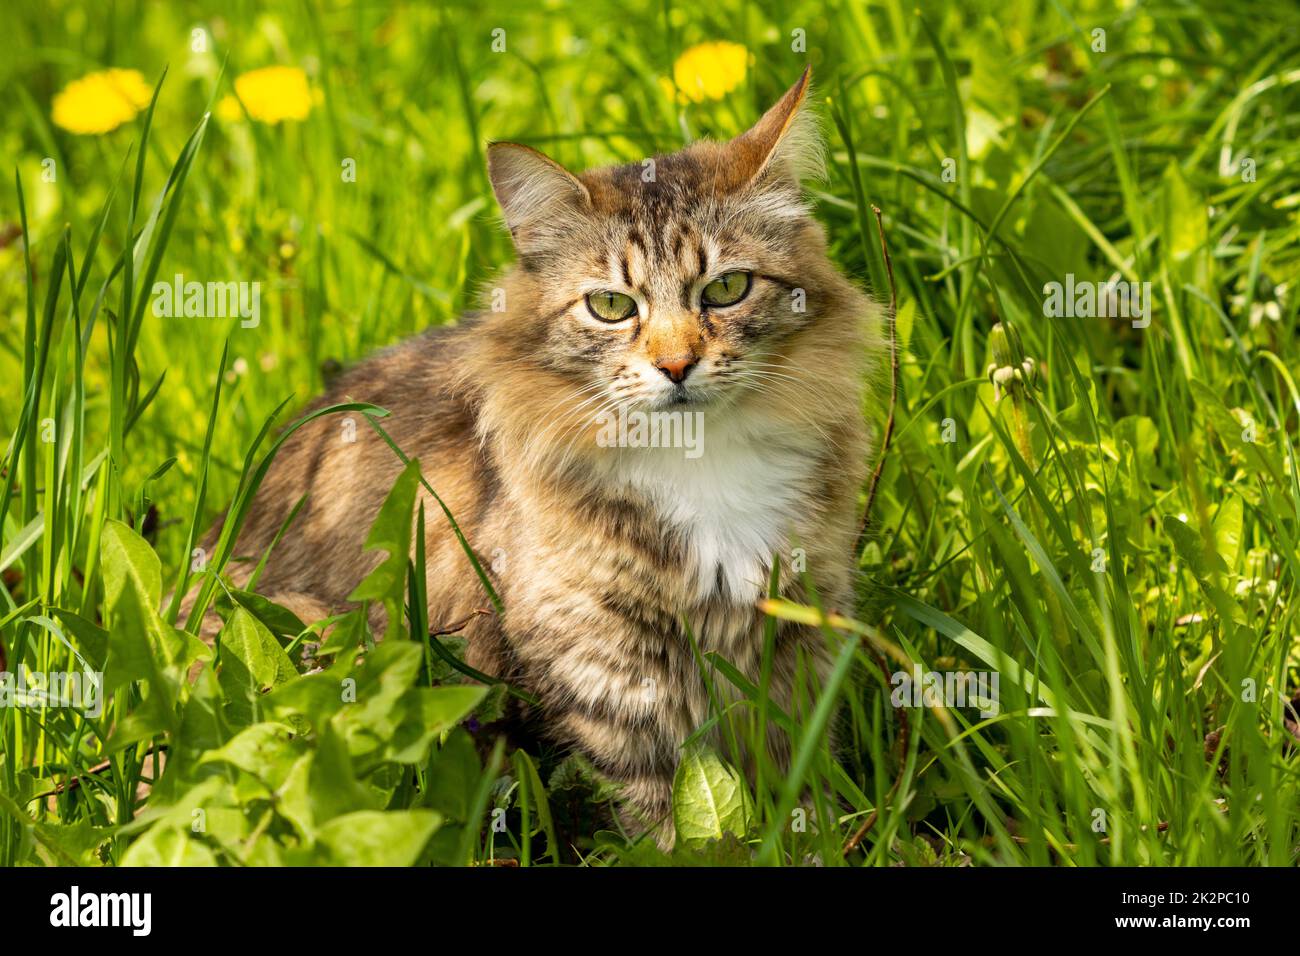 A striped curious cat is looking at the camera Stock Photo